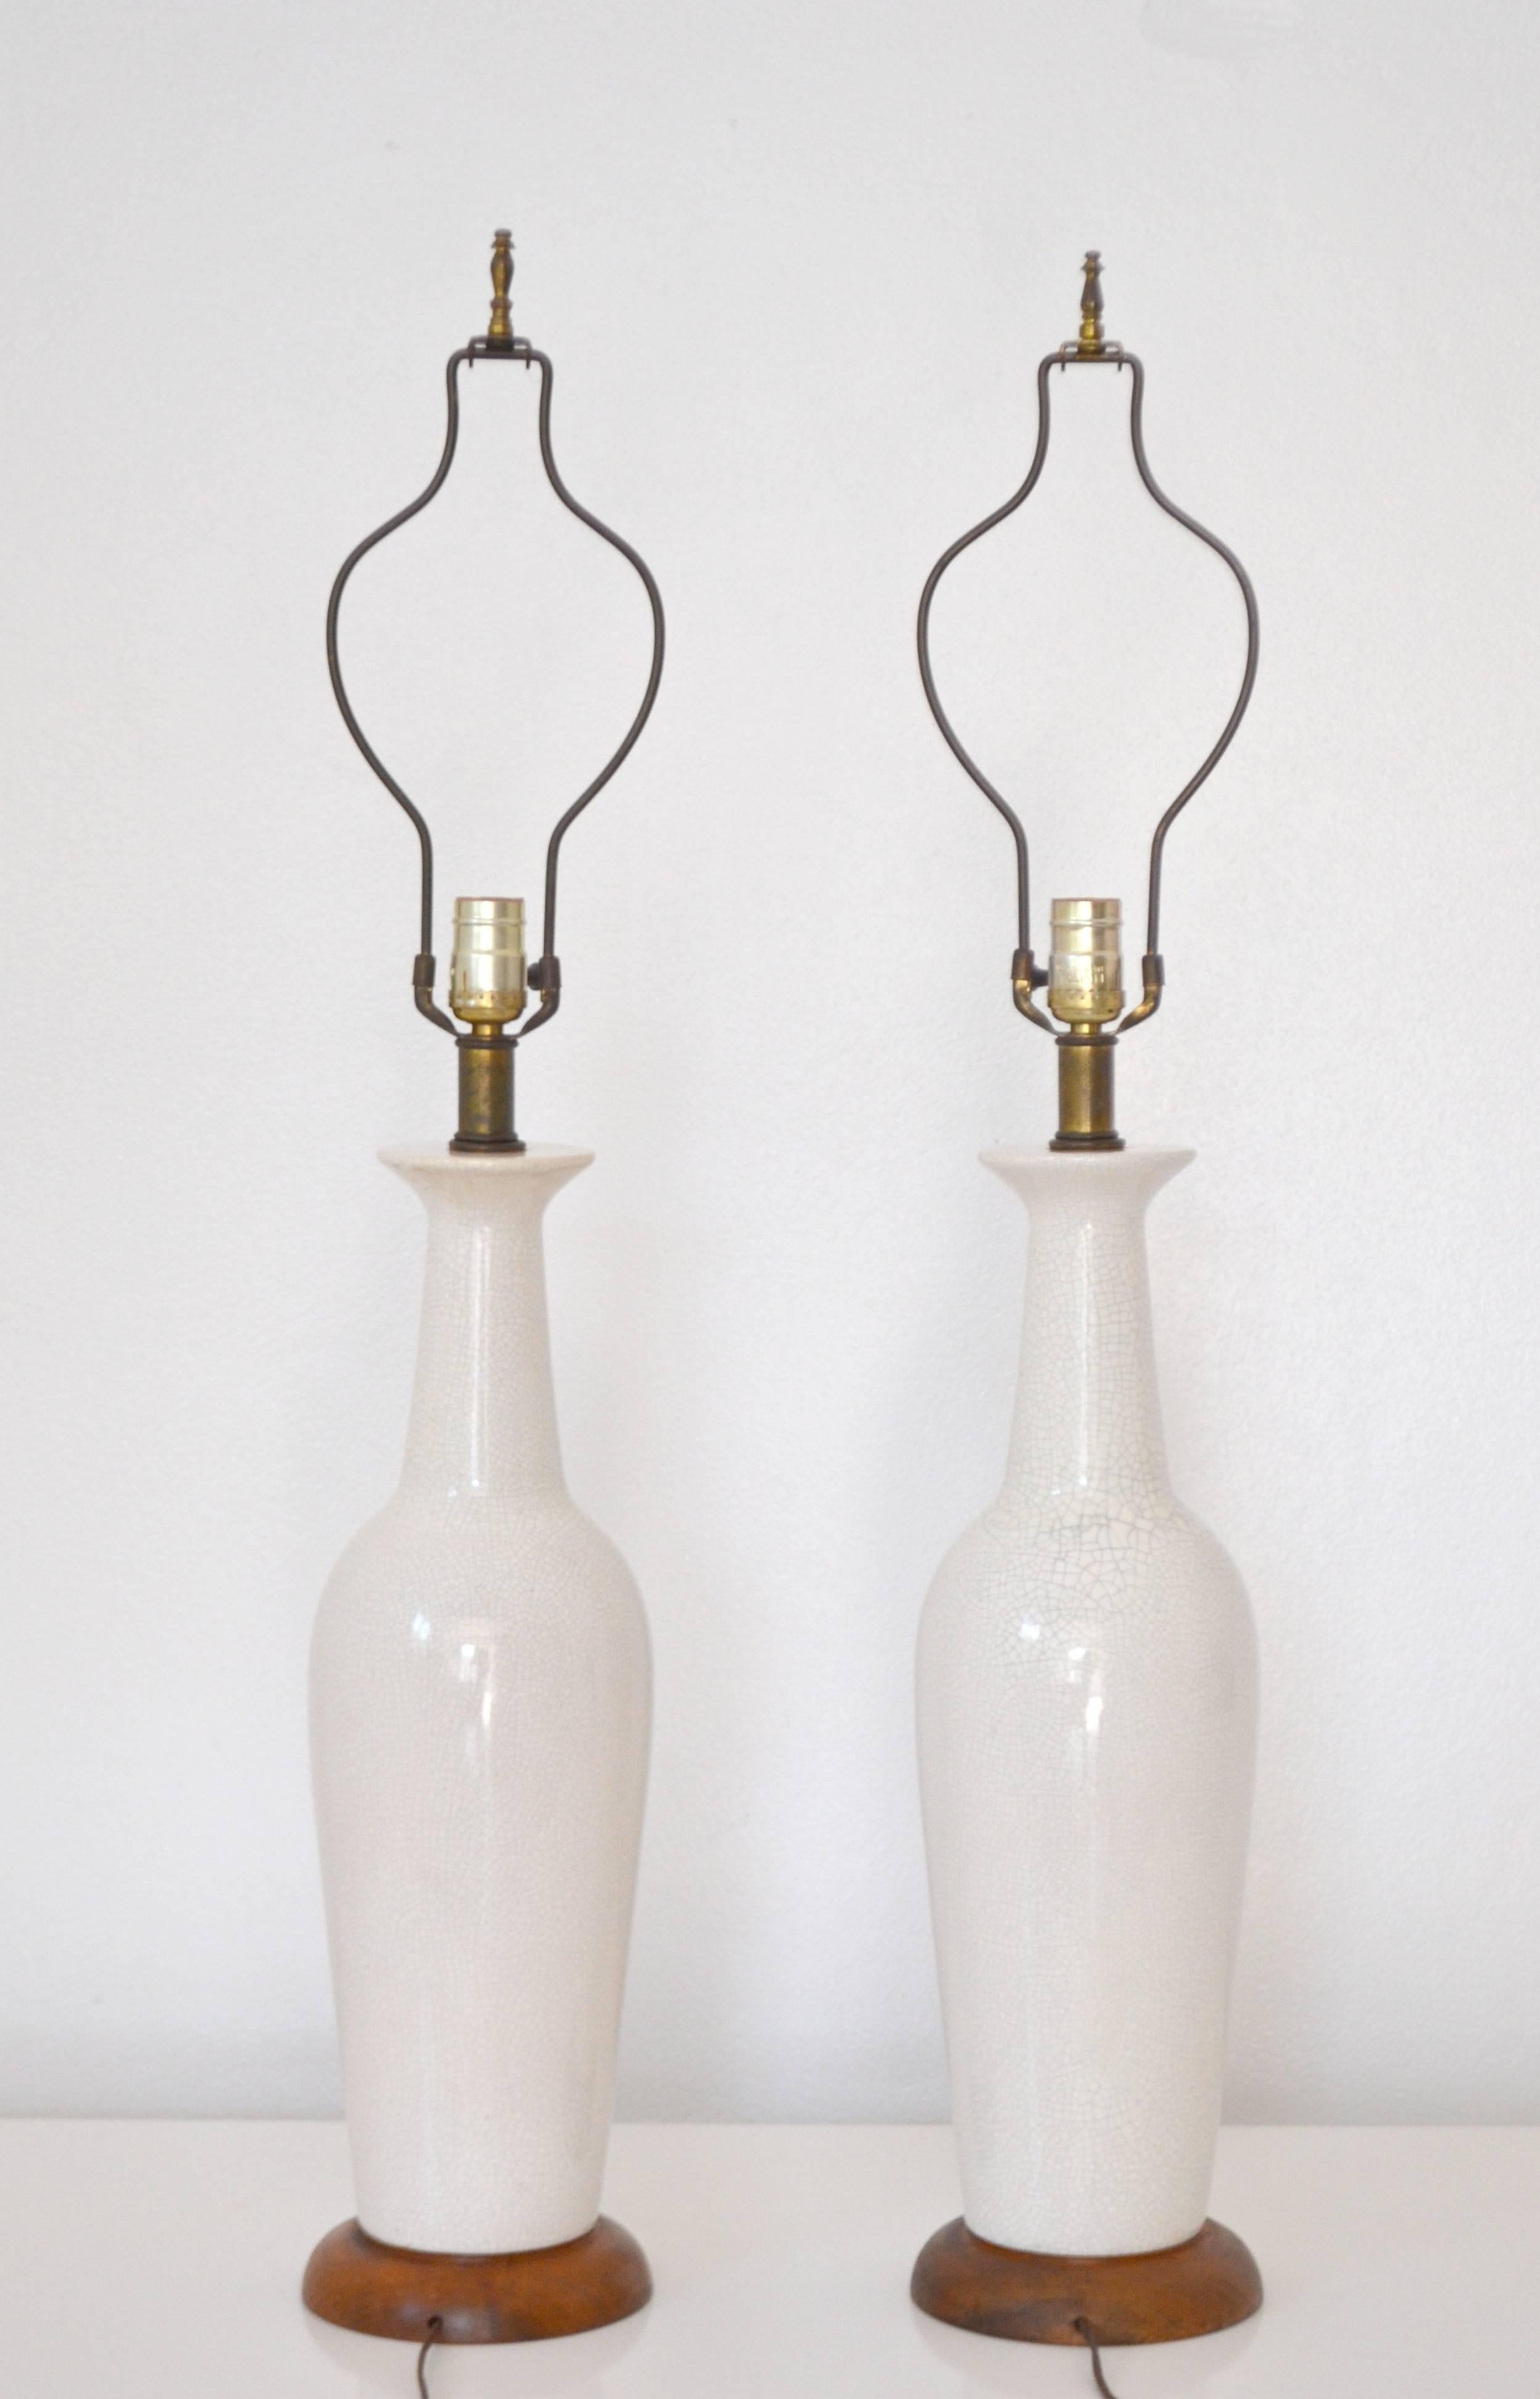 American Pair of Midcentury Crackle Glazed Ceramic Bottle Form Table Lamps For Sale